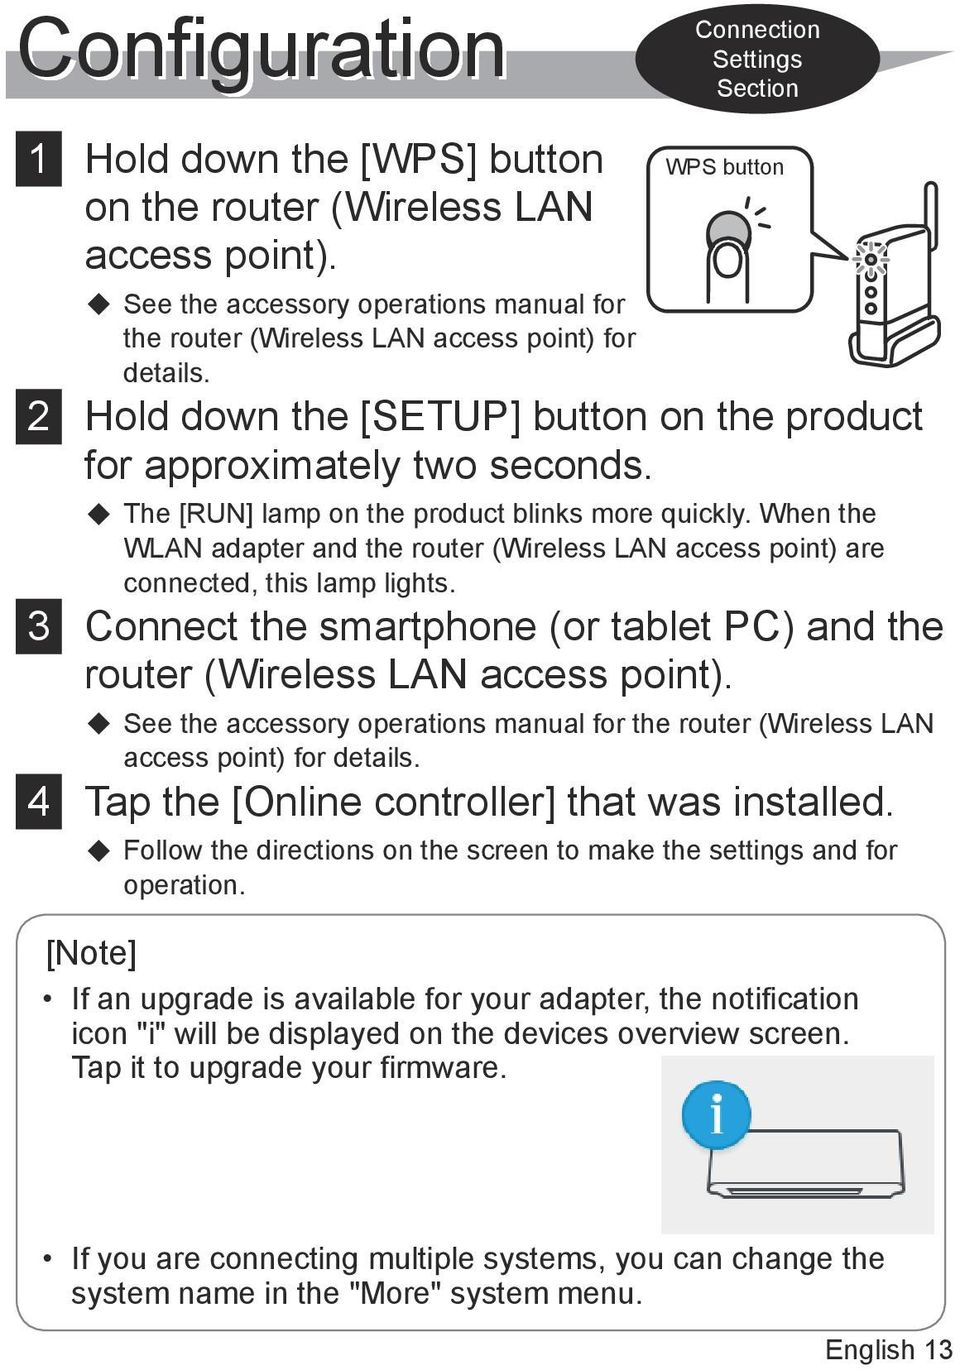 The [RUN] lamp on the product blinks more quickly. When the WLAN adapter and the router (Wireless LAN access point) are connected, this lamp lights.